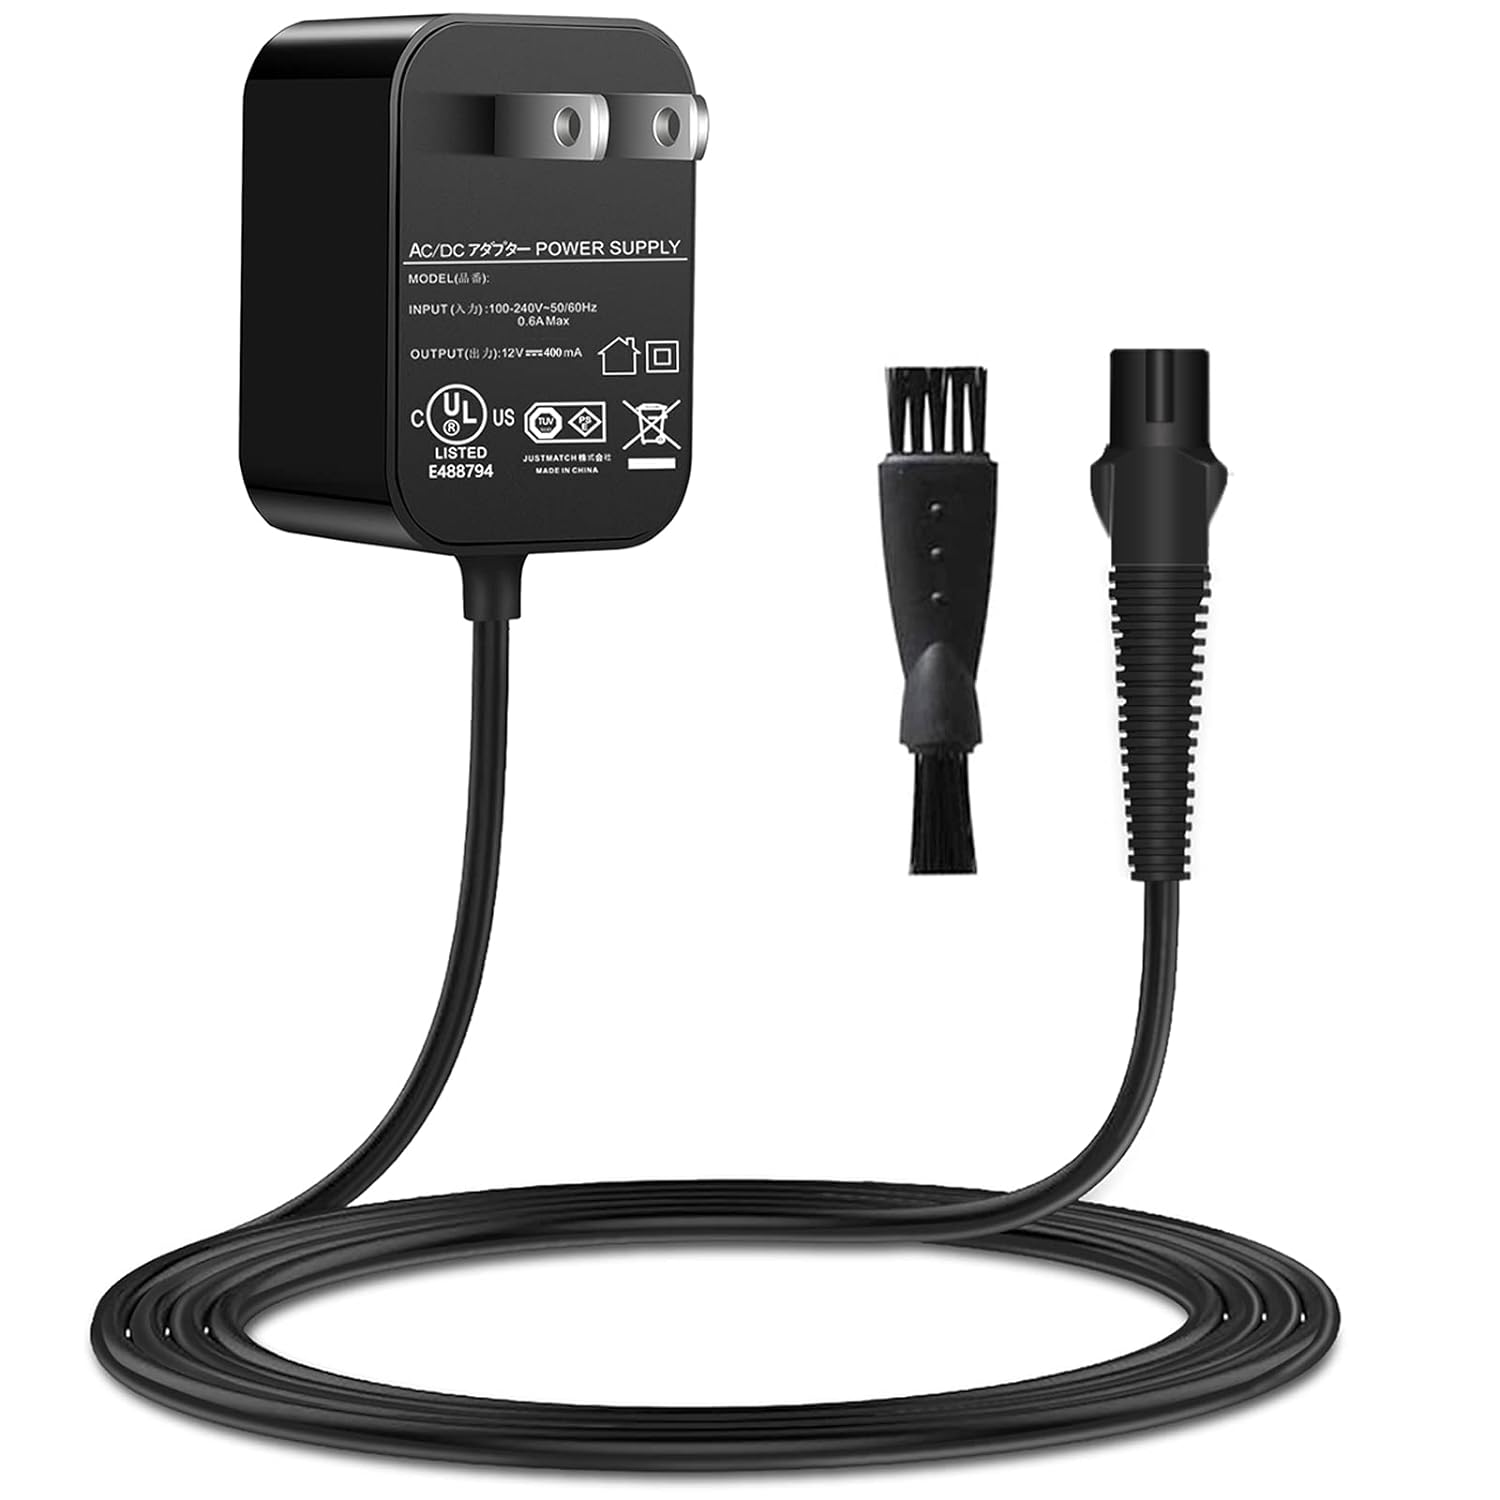 Charger Replacement for Braun Charger, 12V Power Cord Compatible with Braun Shaver Series 3/7/5/1/9, Razor 3040s 310s 34 - Click Image to Close